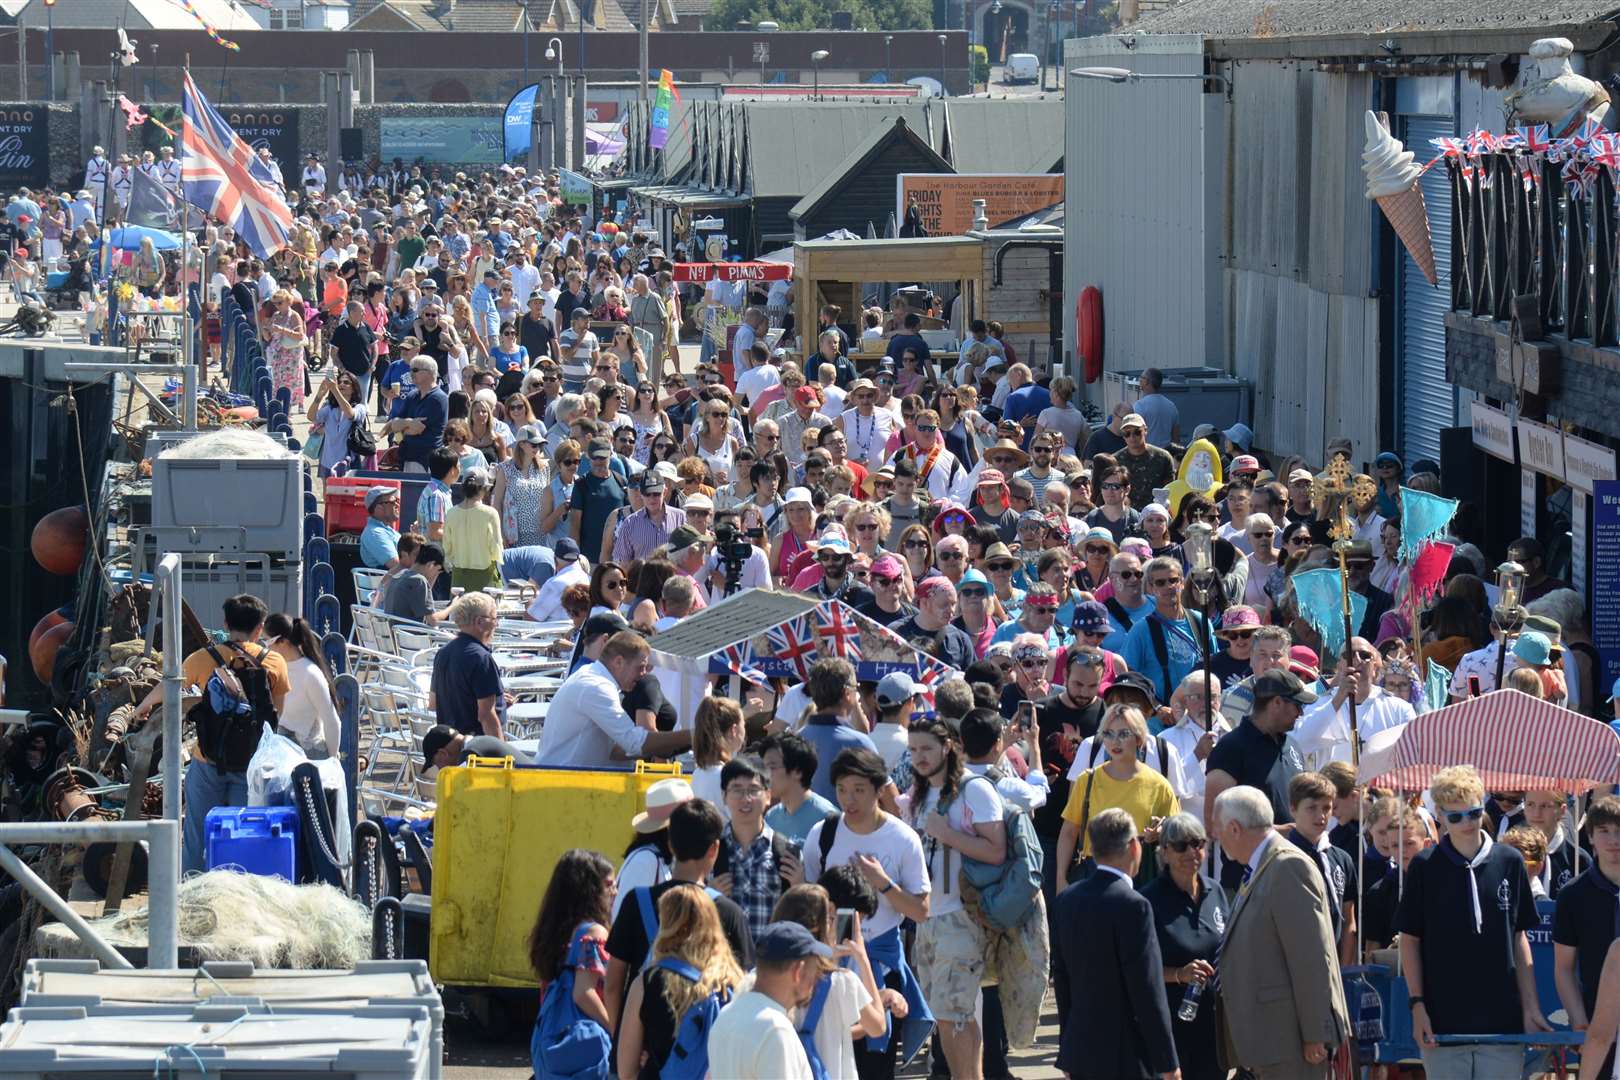 The crowd at the harbour for the Whitstable Oyster Festival in 2018. Picture: Chris Davey